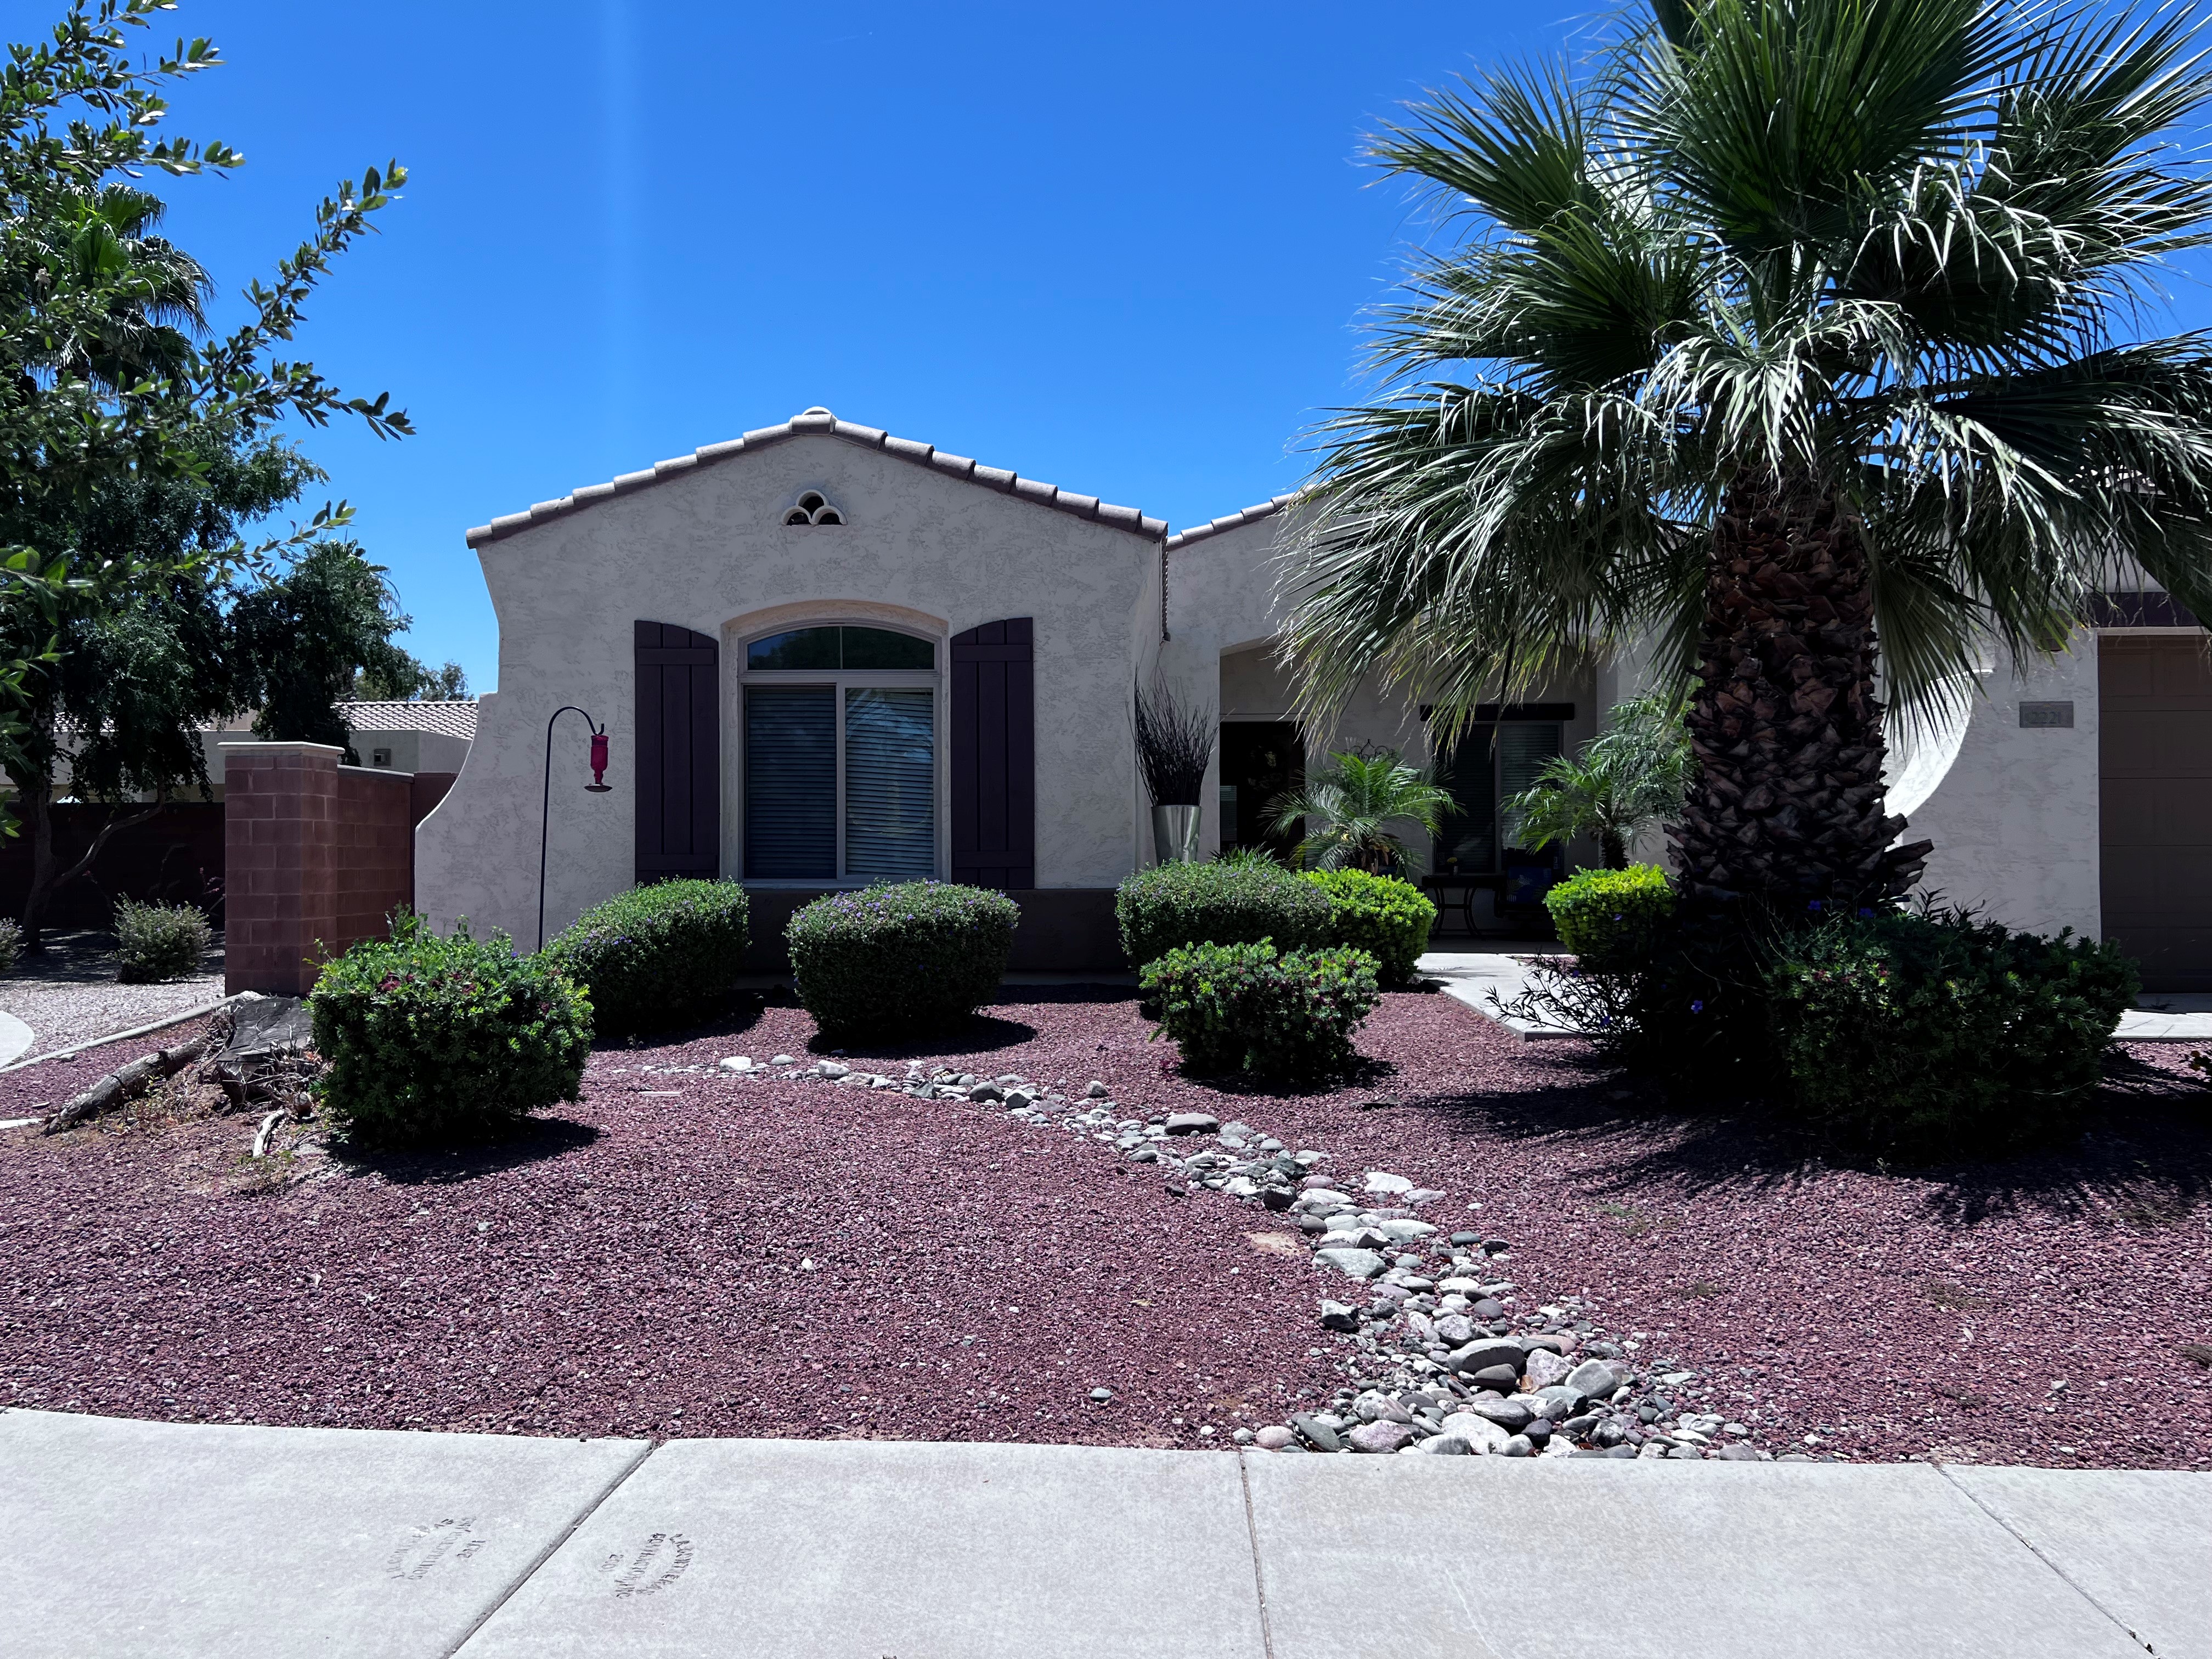 DESERT OASIS AT COUNTRYSIDE ESTATES ASSISTED LIVING